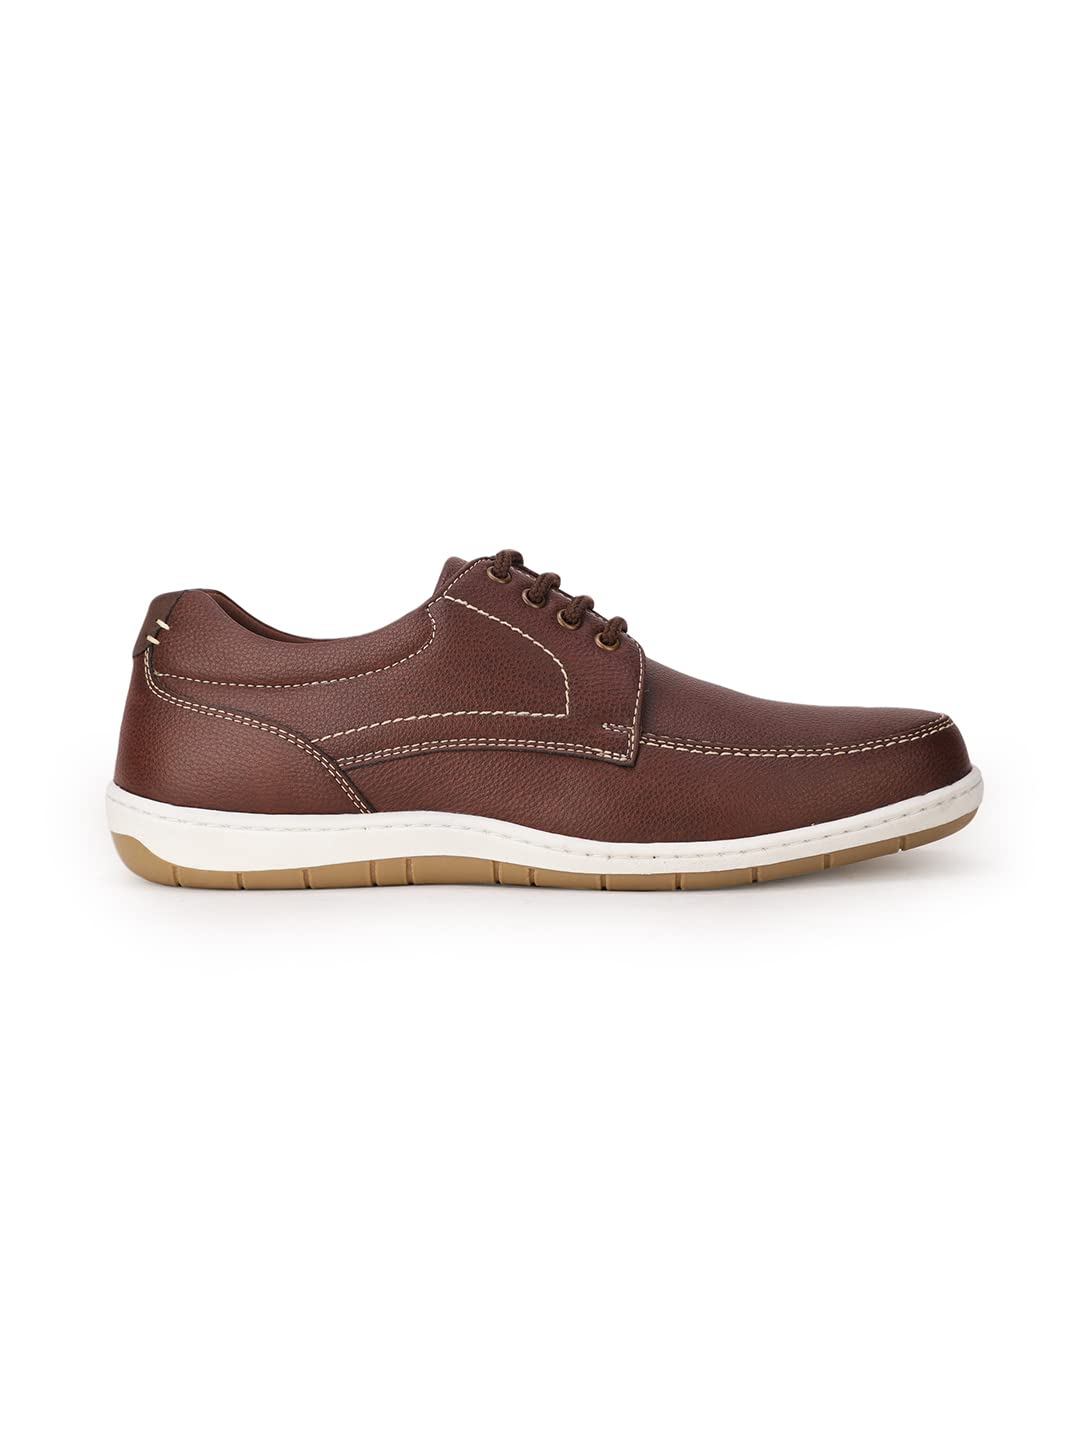 Bata Mens I-and Laceup Casual Shoes,Brown 